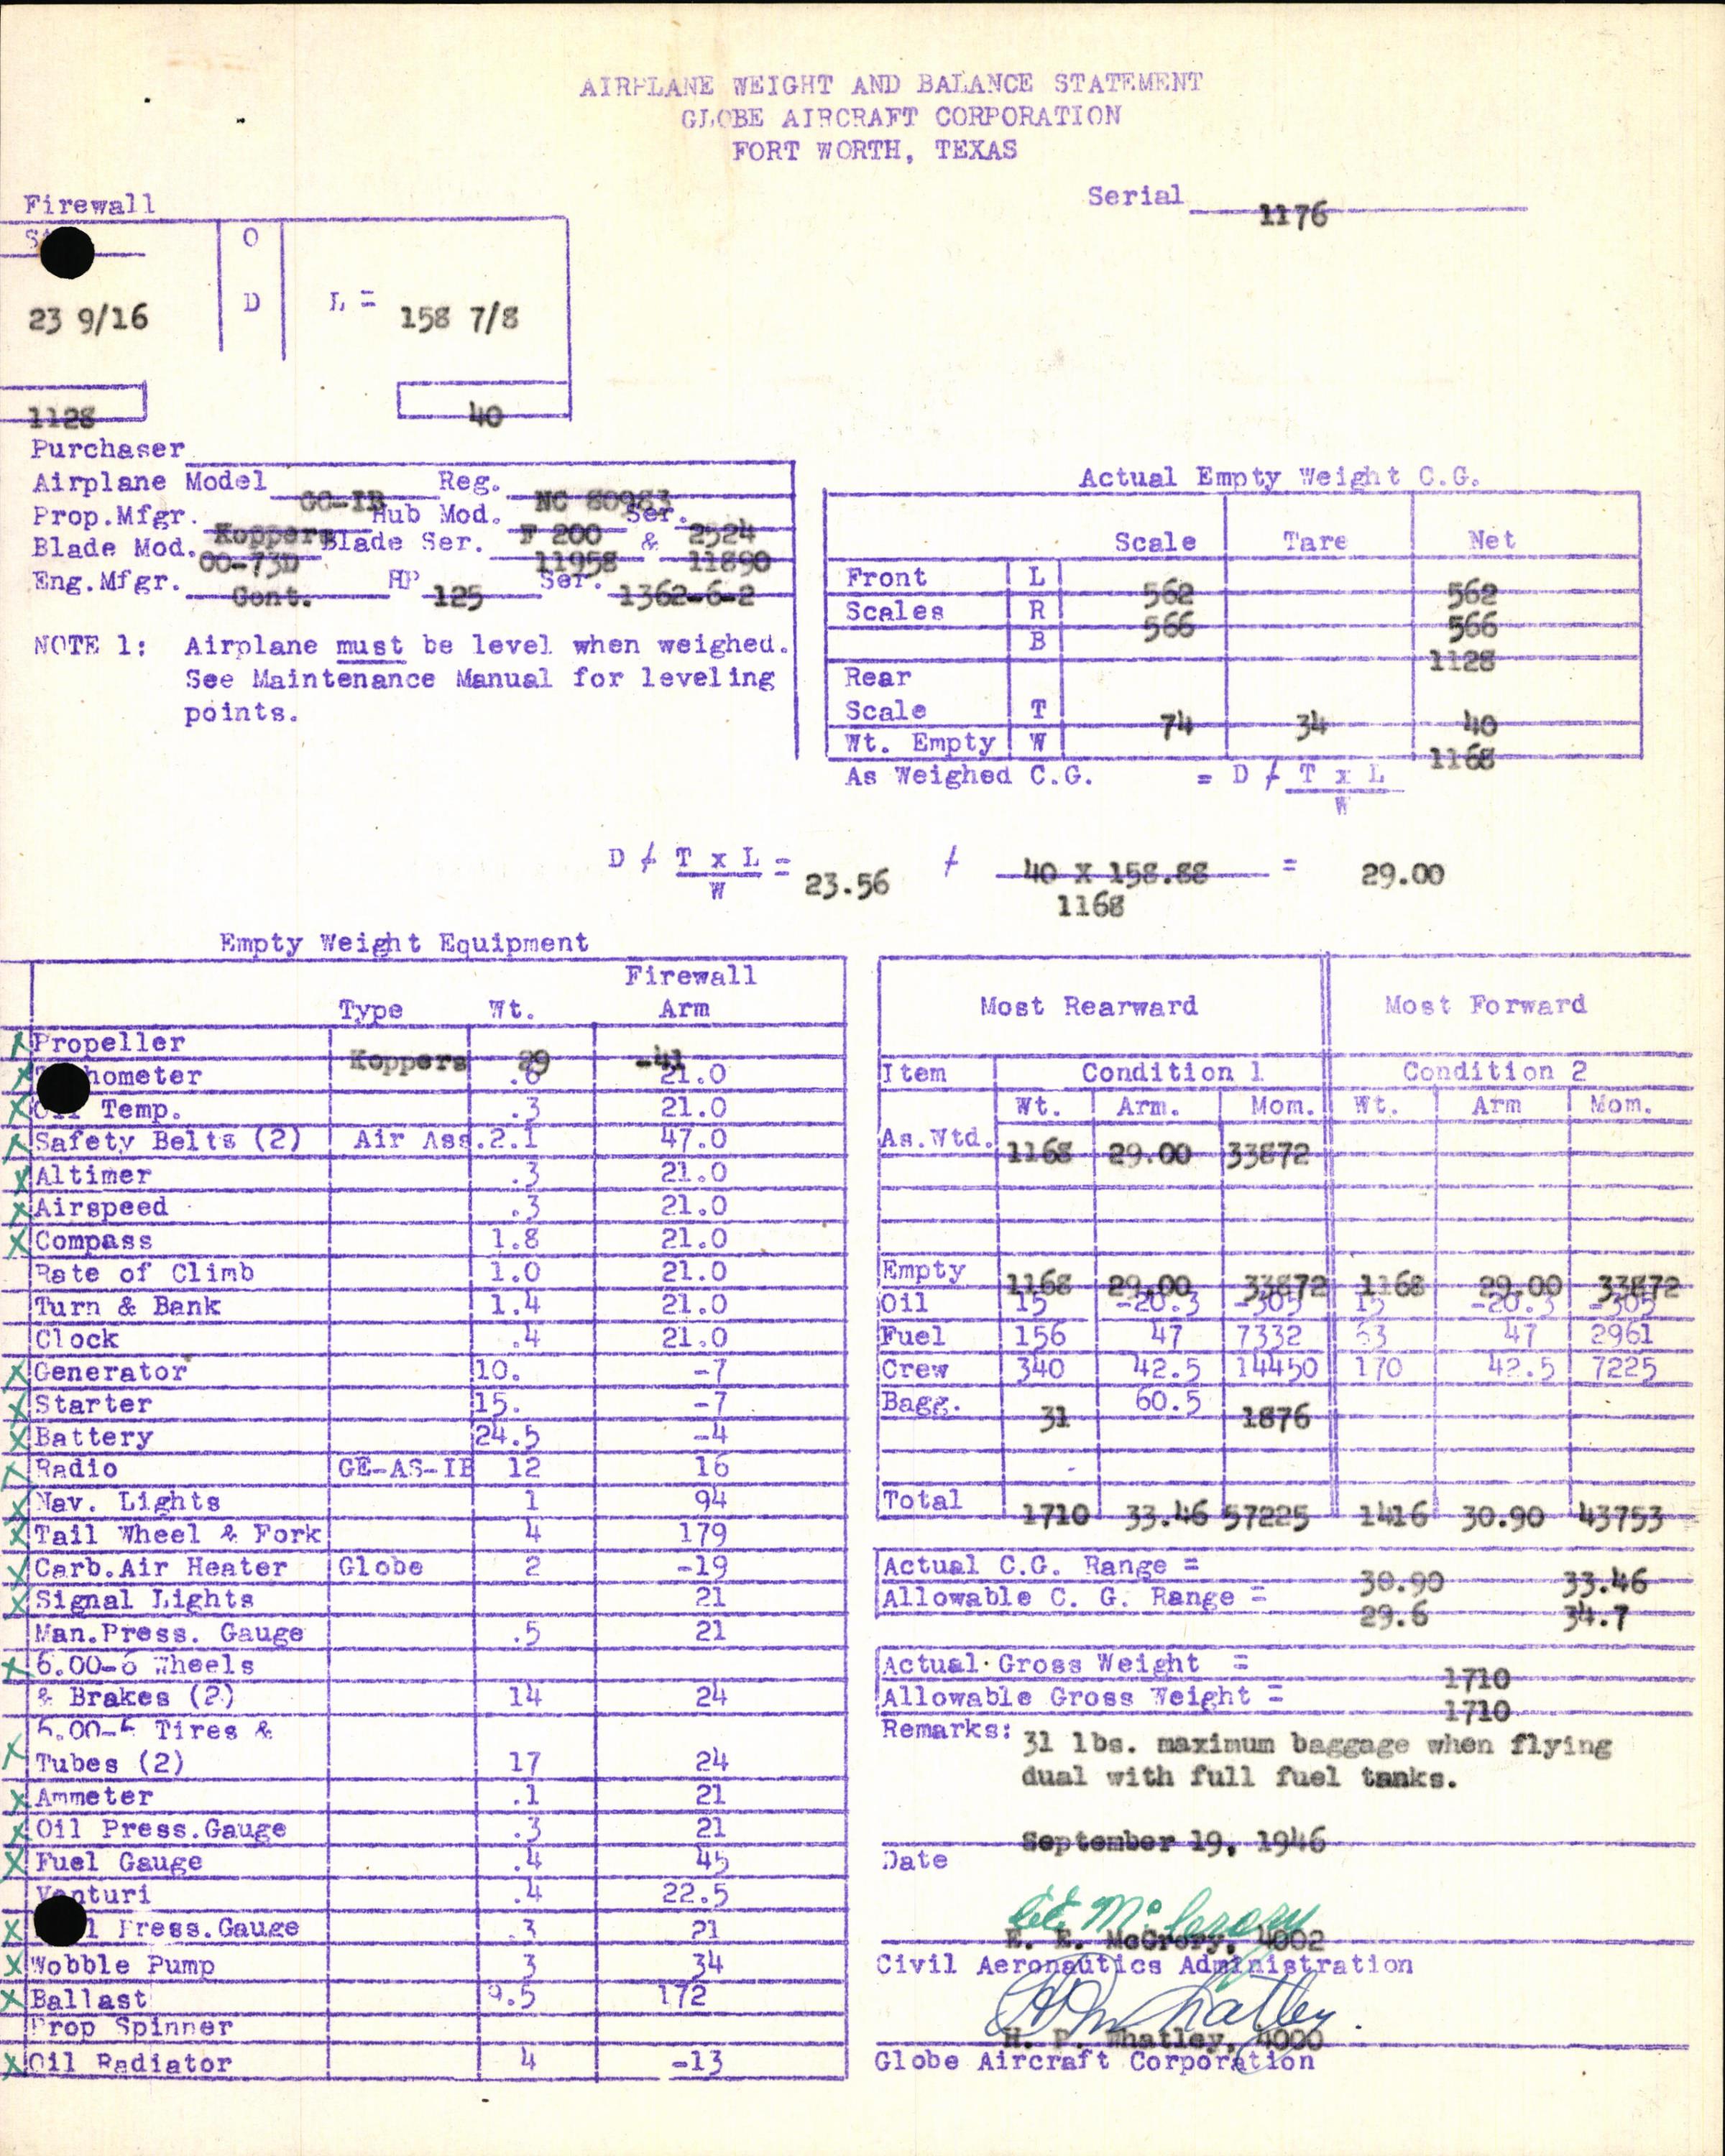 Sample page 7 from AirCorps Library document: Technical Information for Serial Number 1176